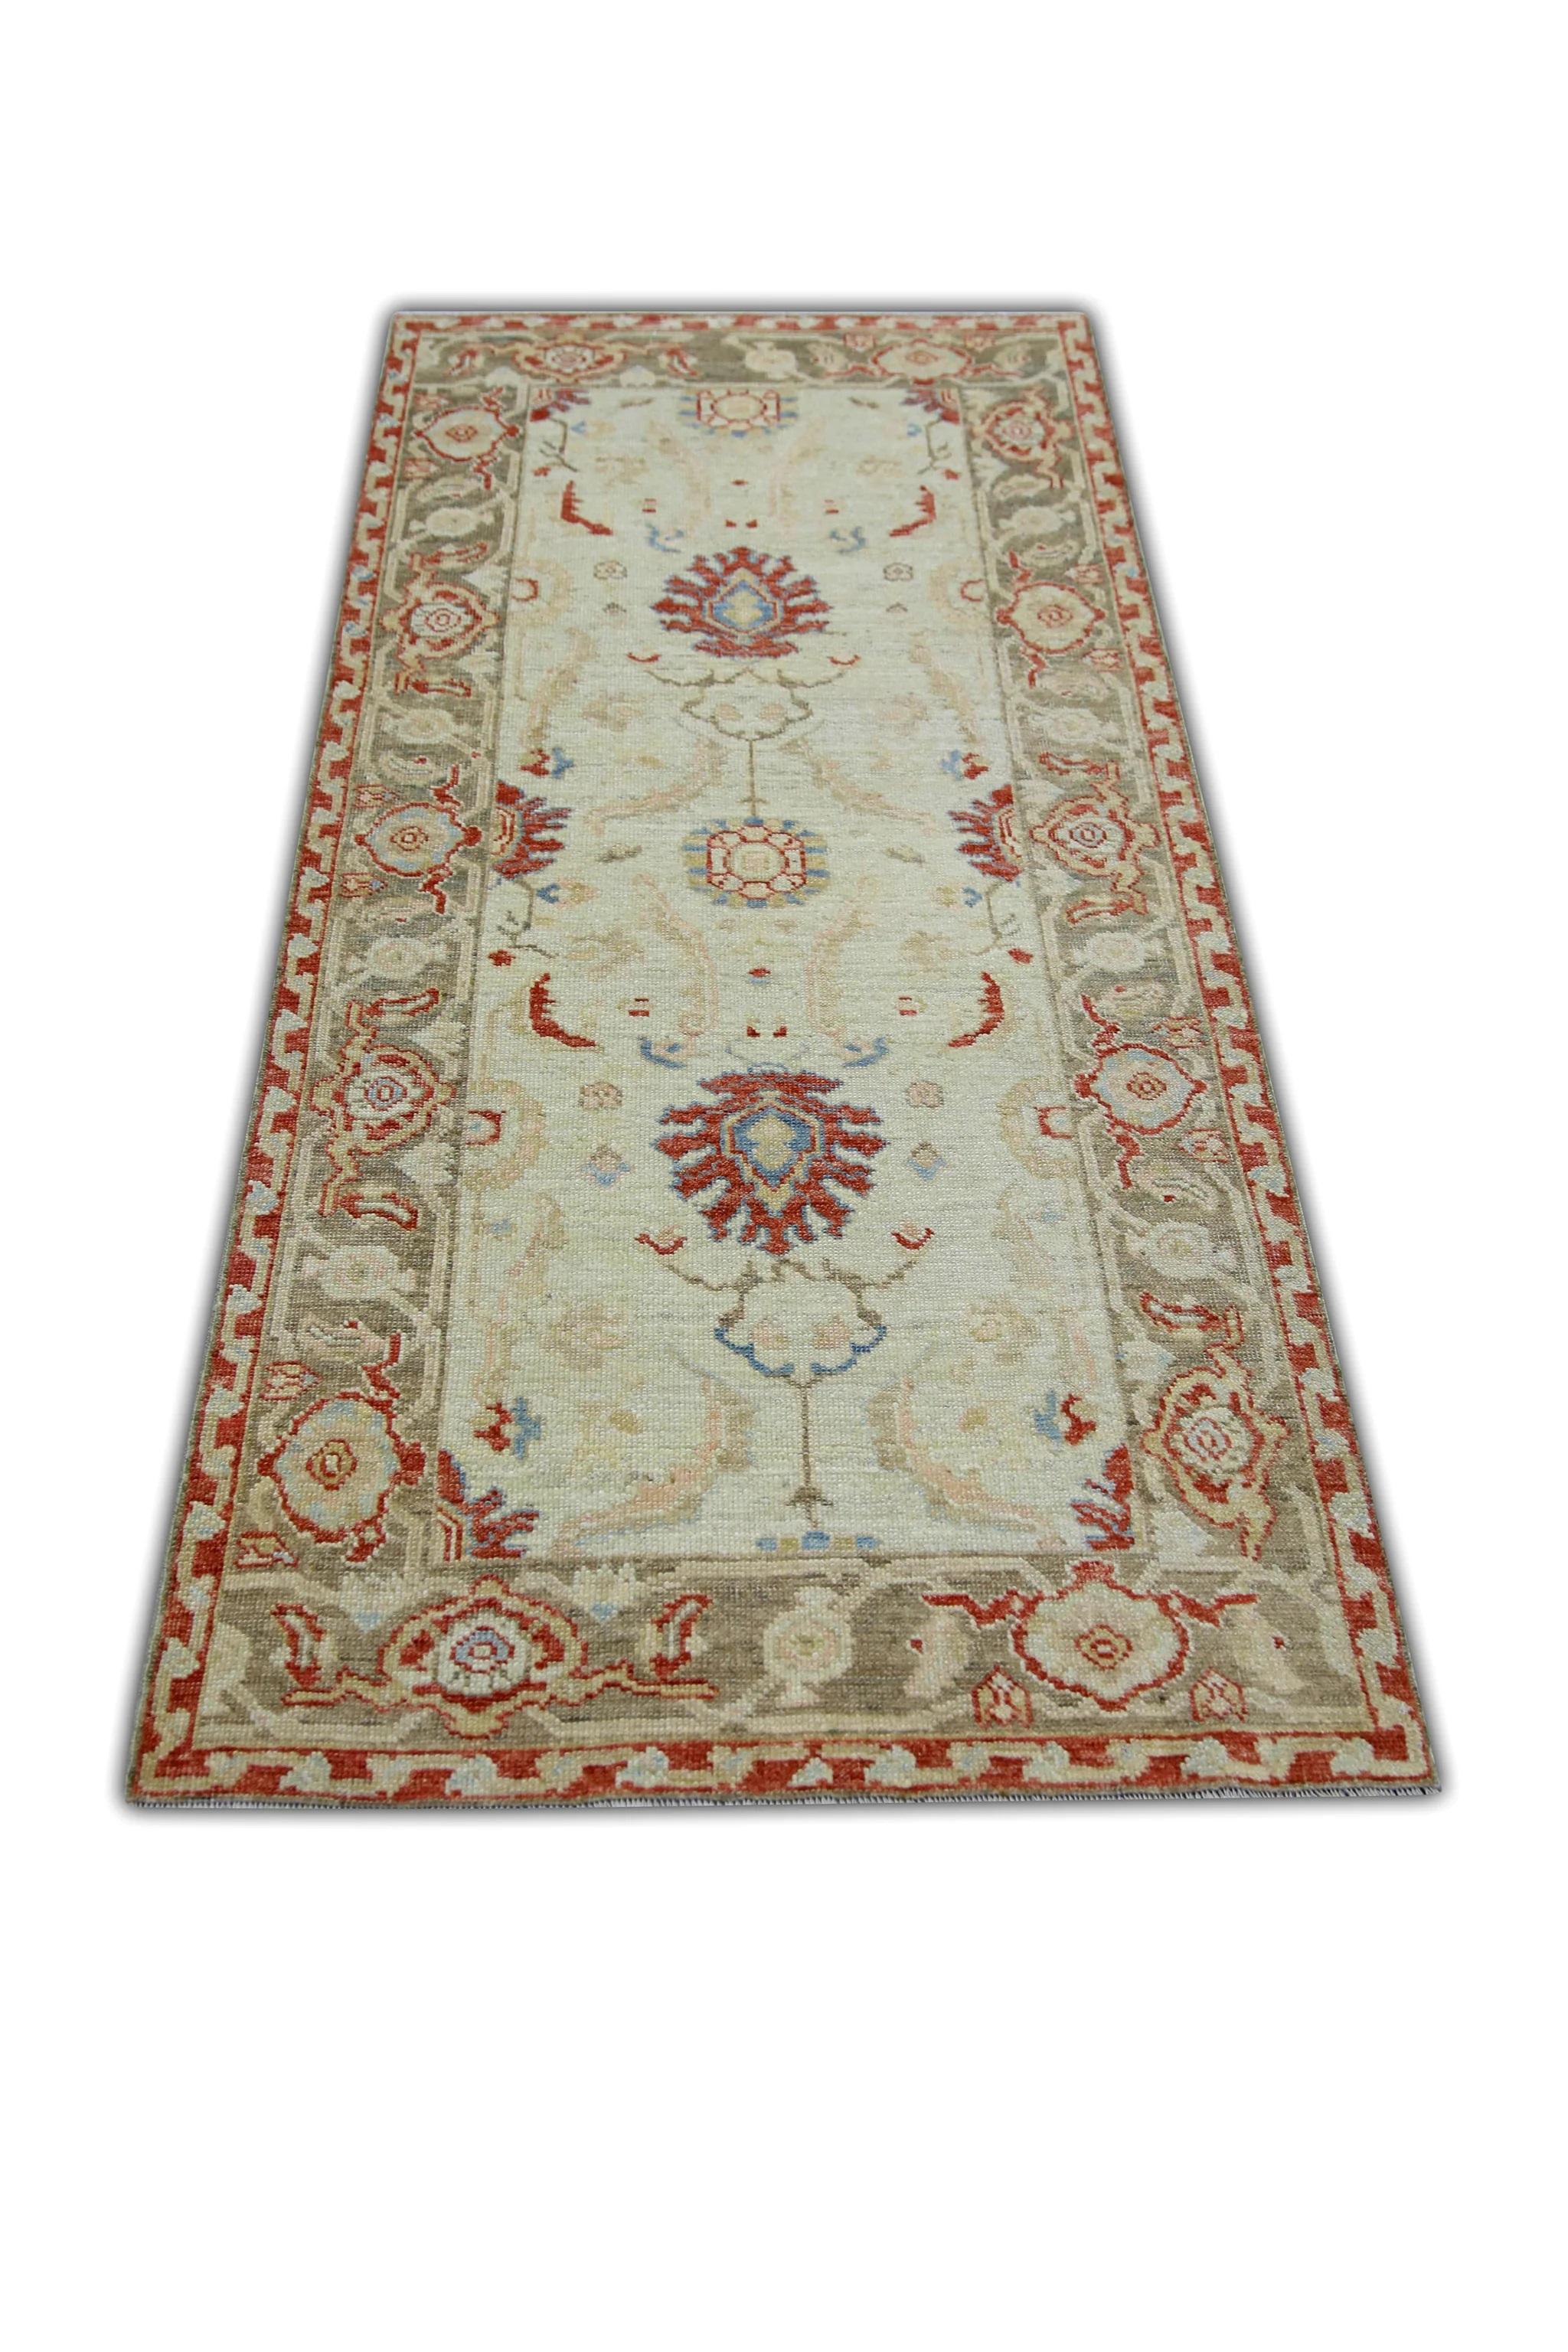 Floral Turkish Finewoven Wool Oushak Rug in Red, Cream, and Green 2'8